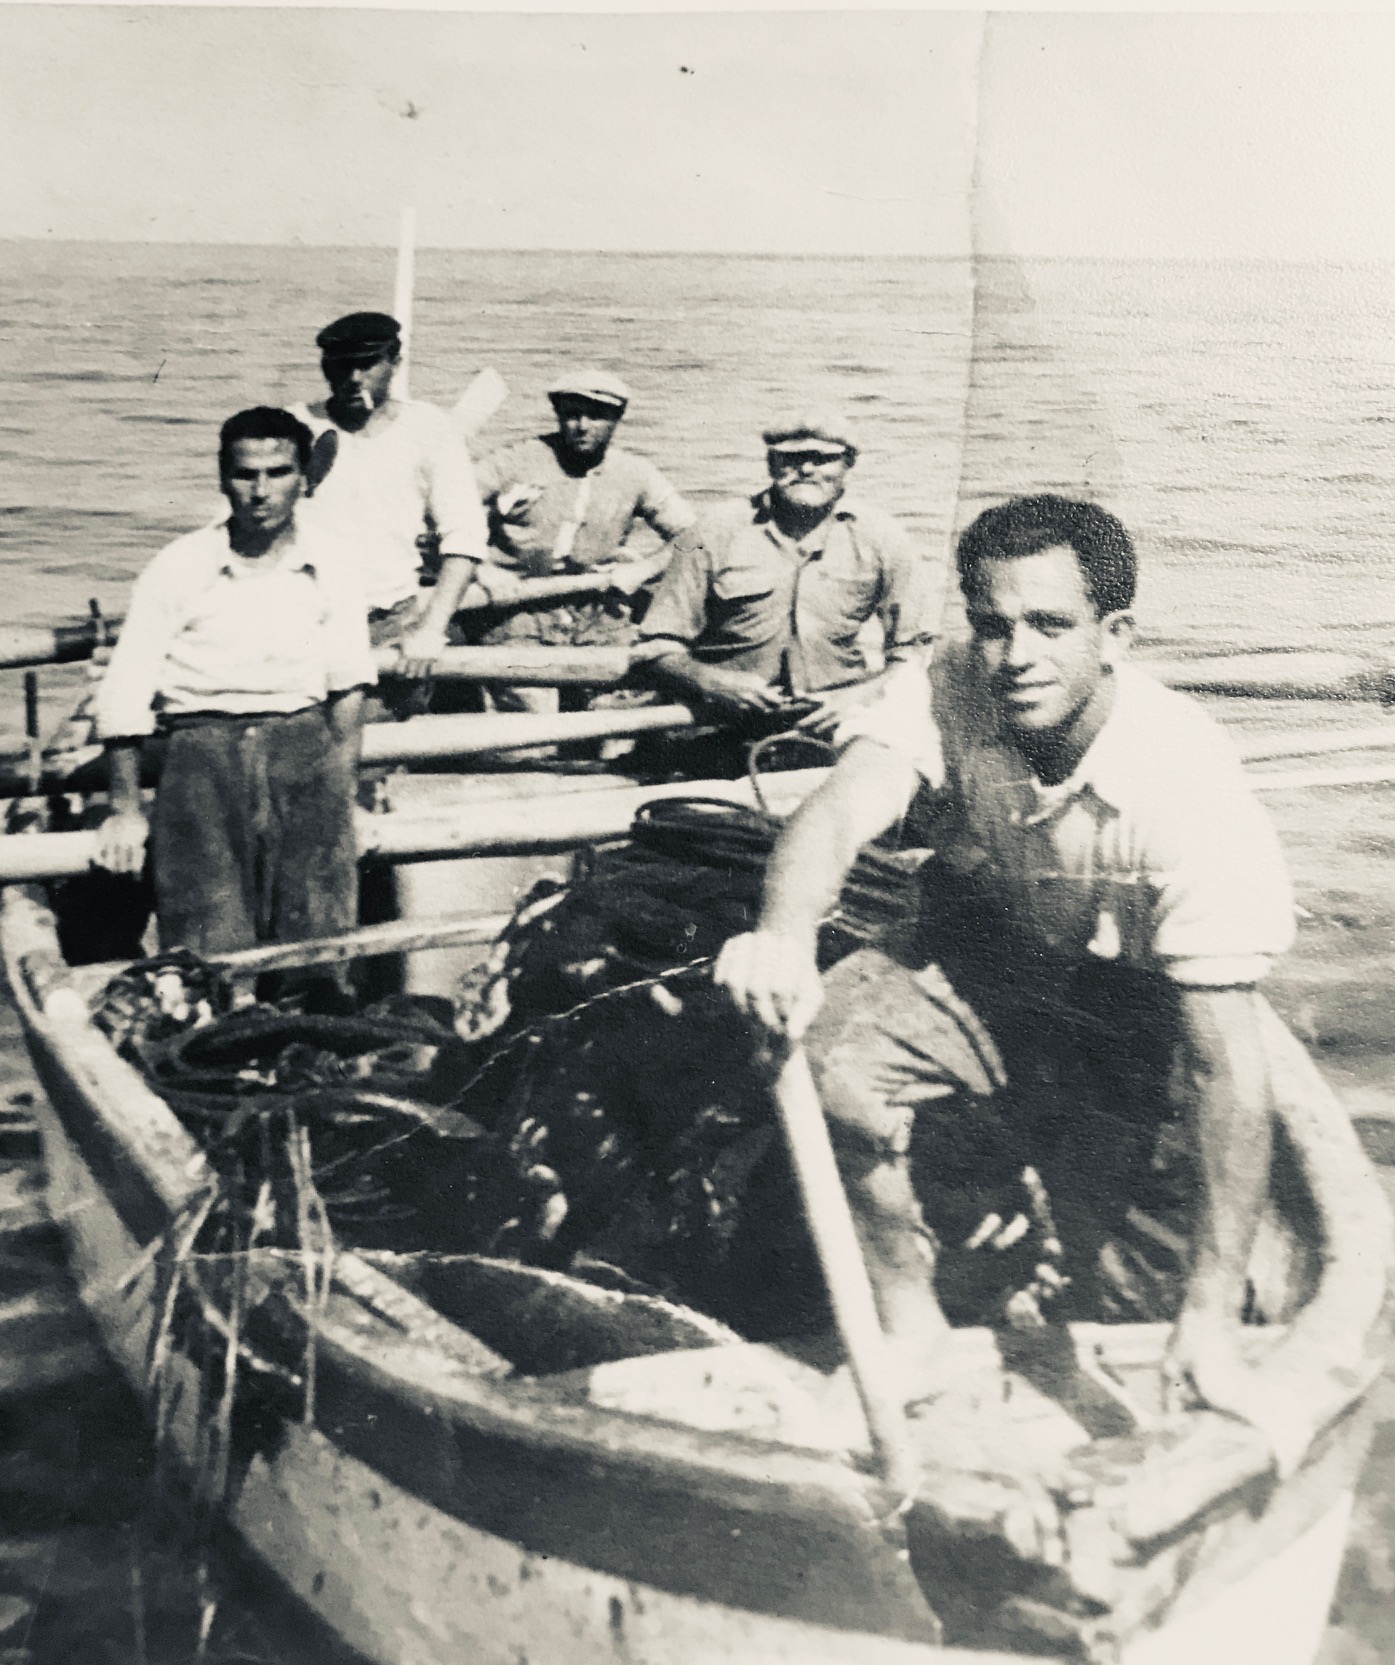 my great grandfather on my mother’s side, a fisherman